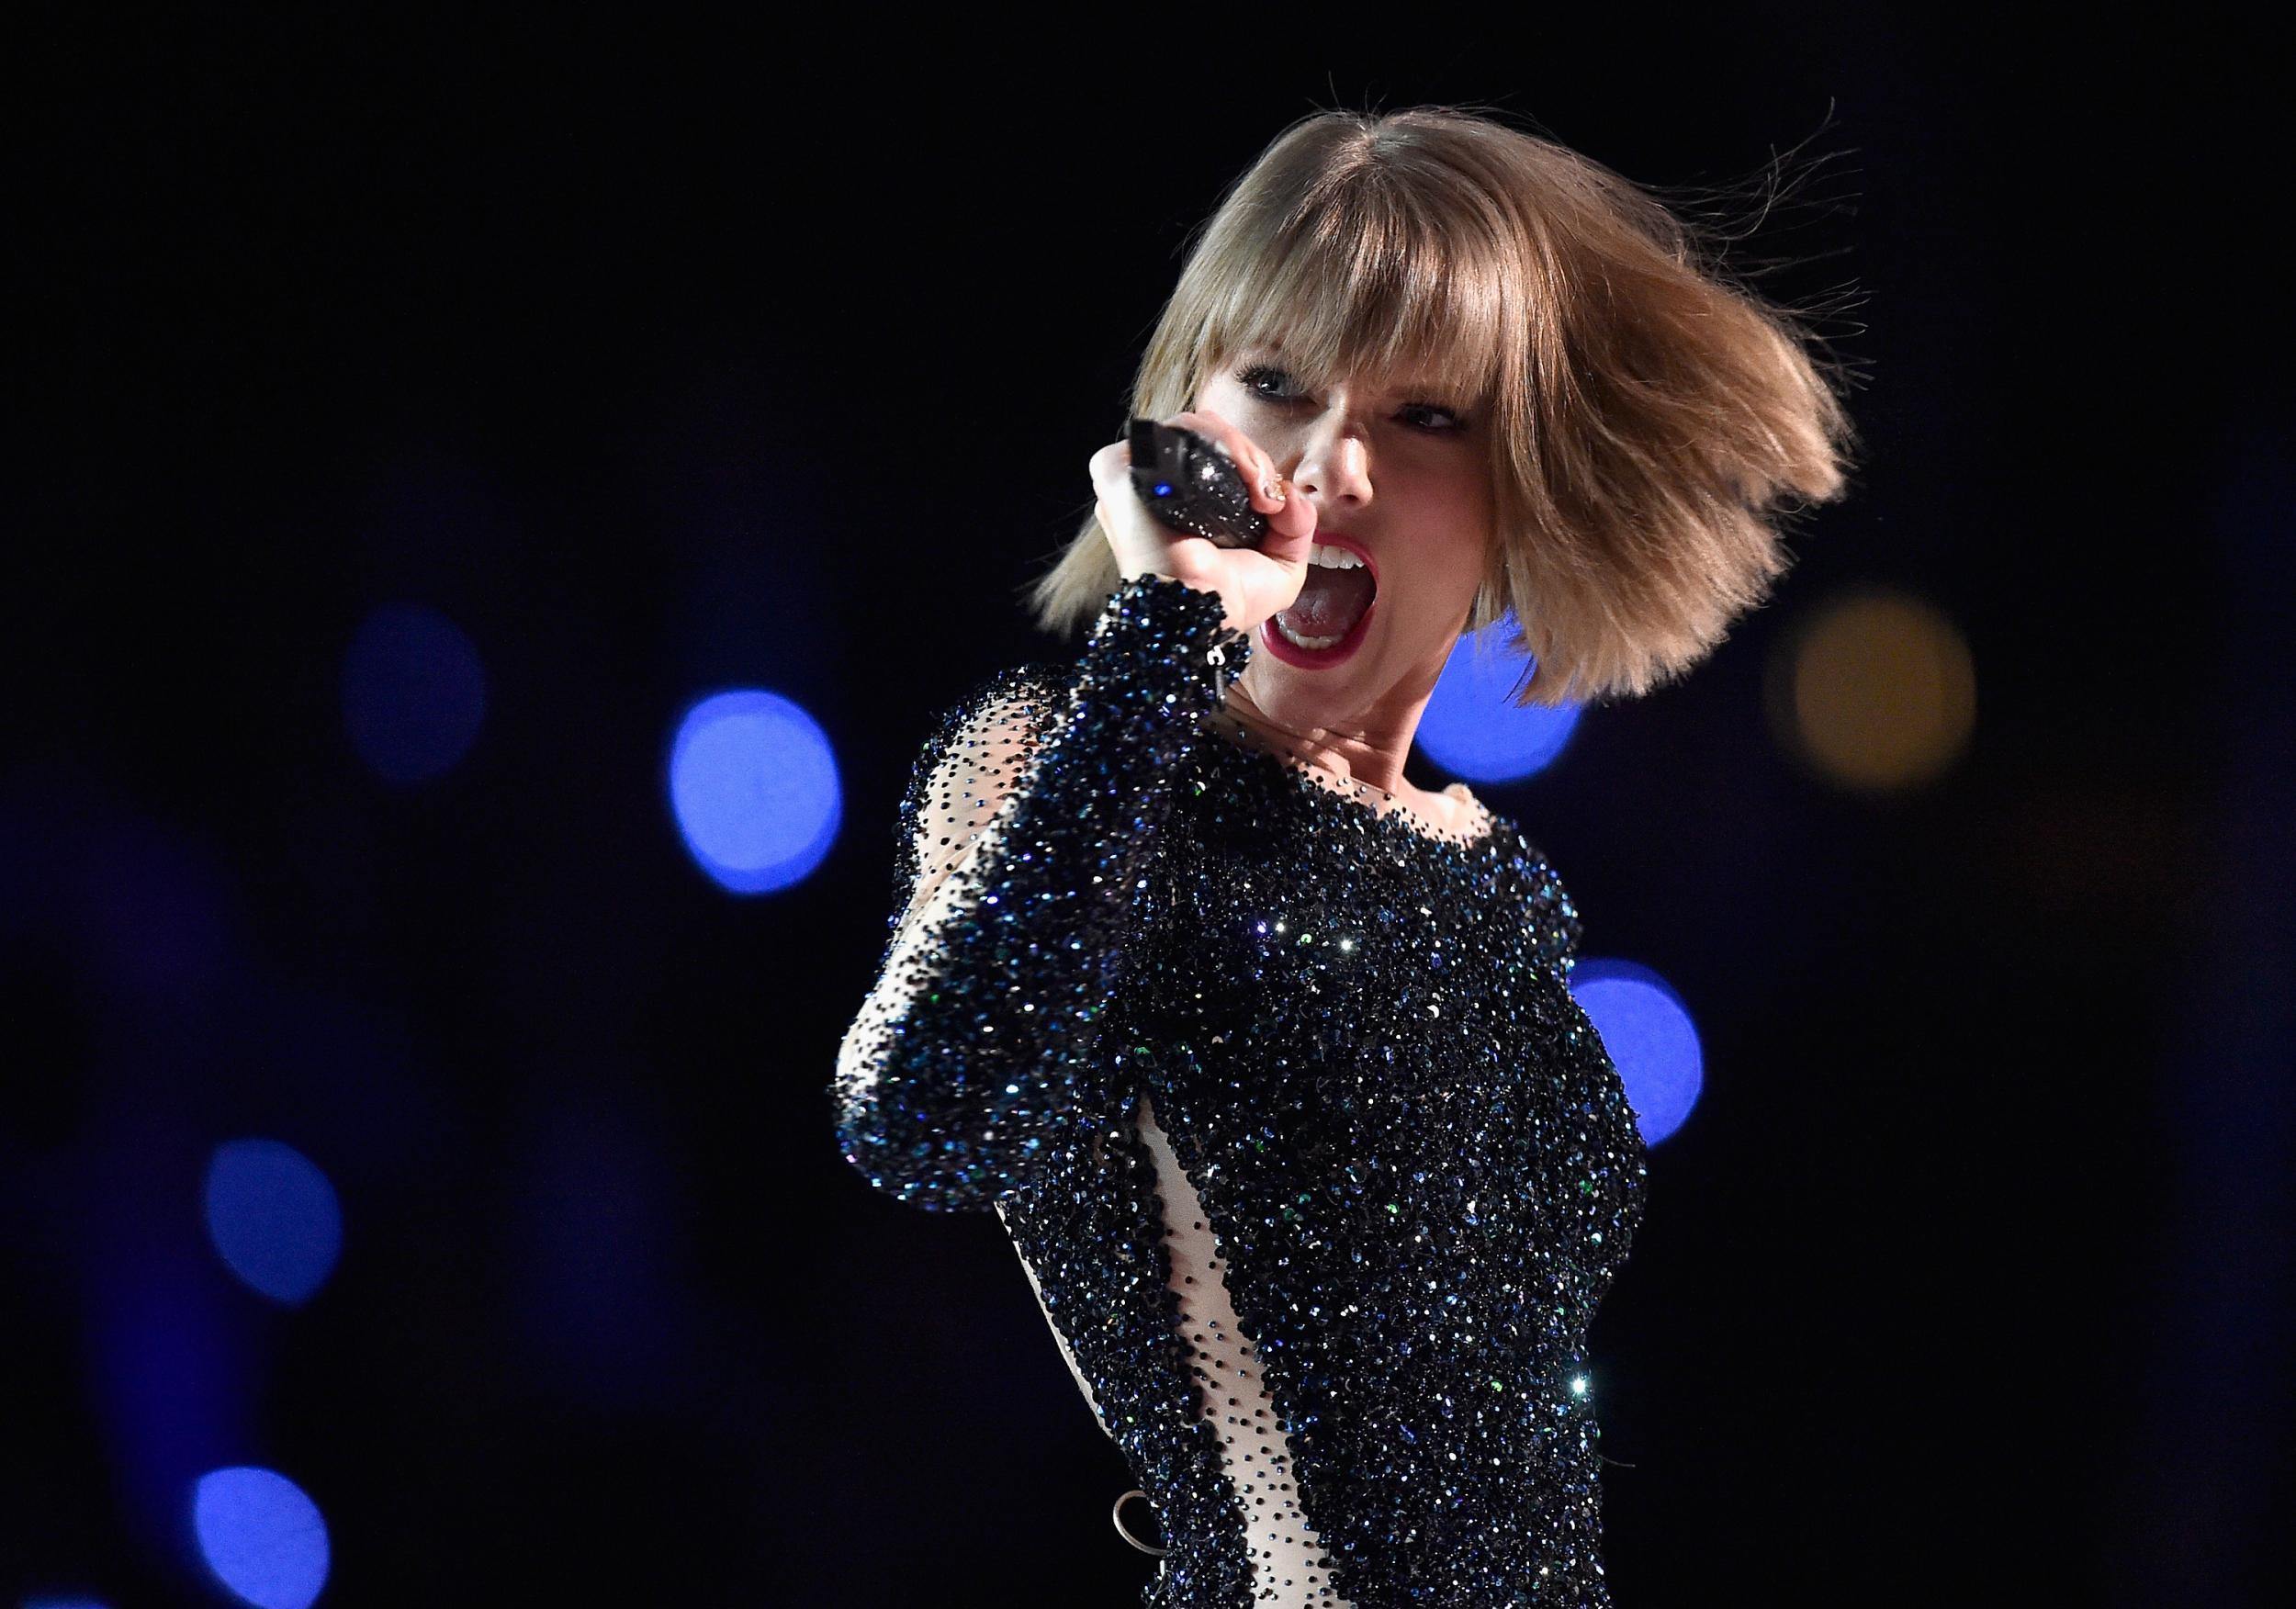 Taylor Swift released her sixth studio album 'reputation' this year